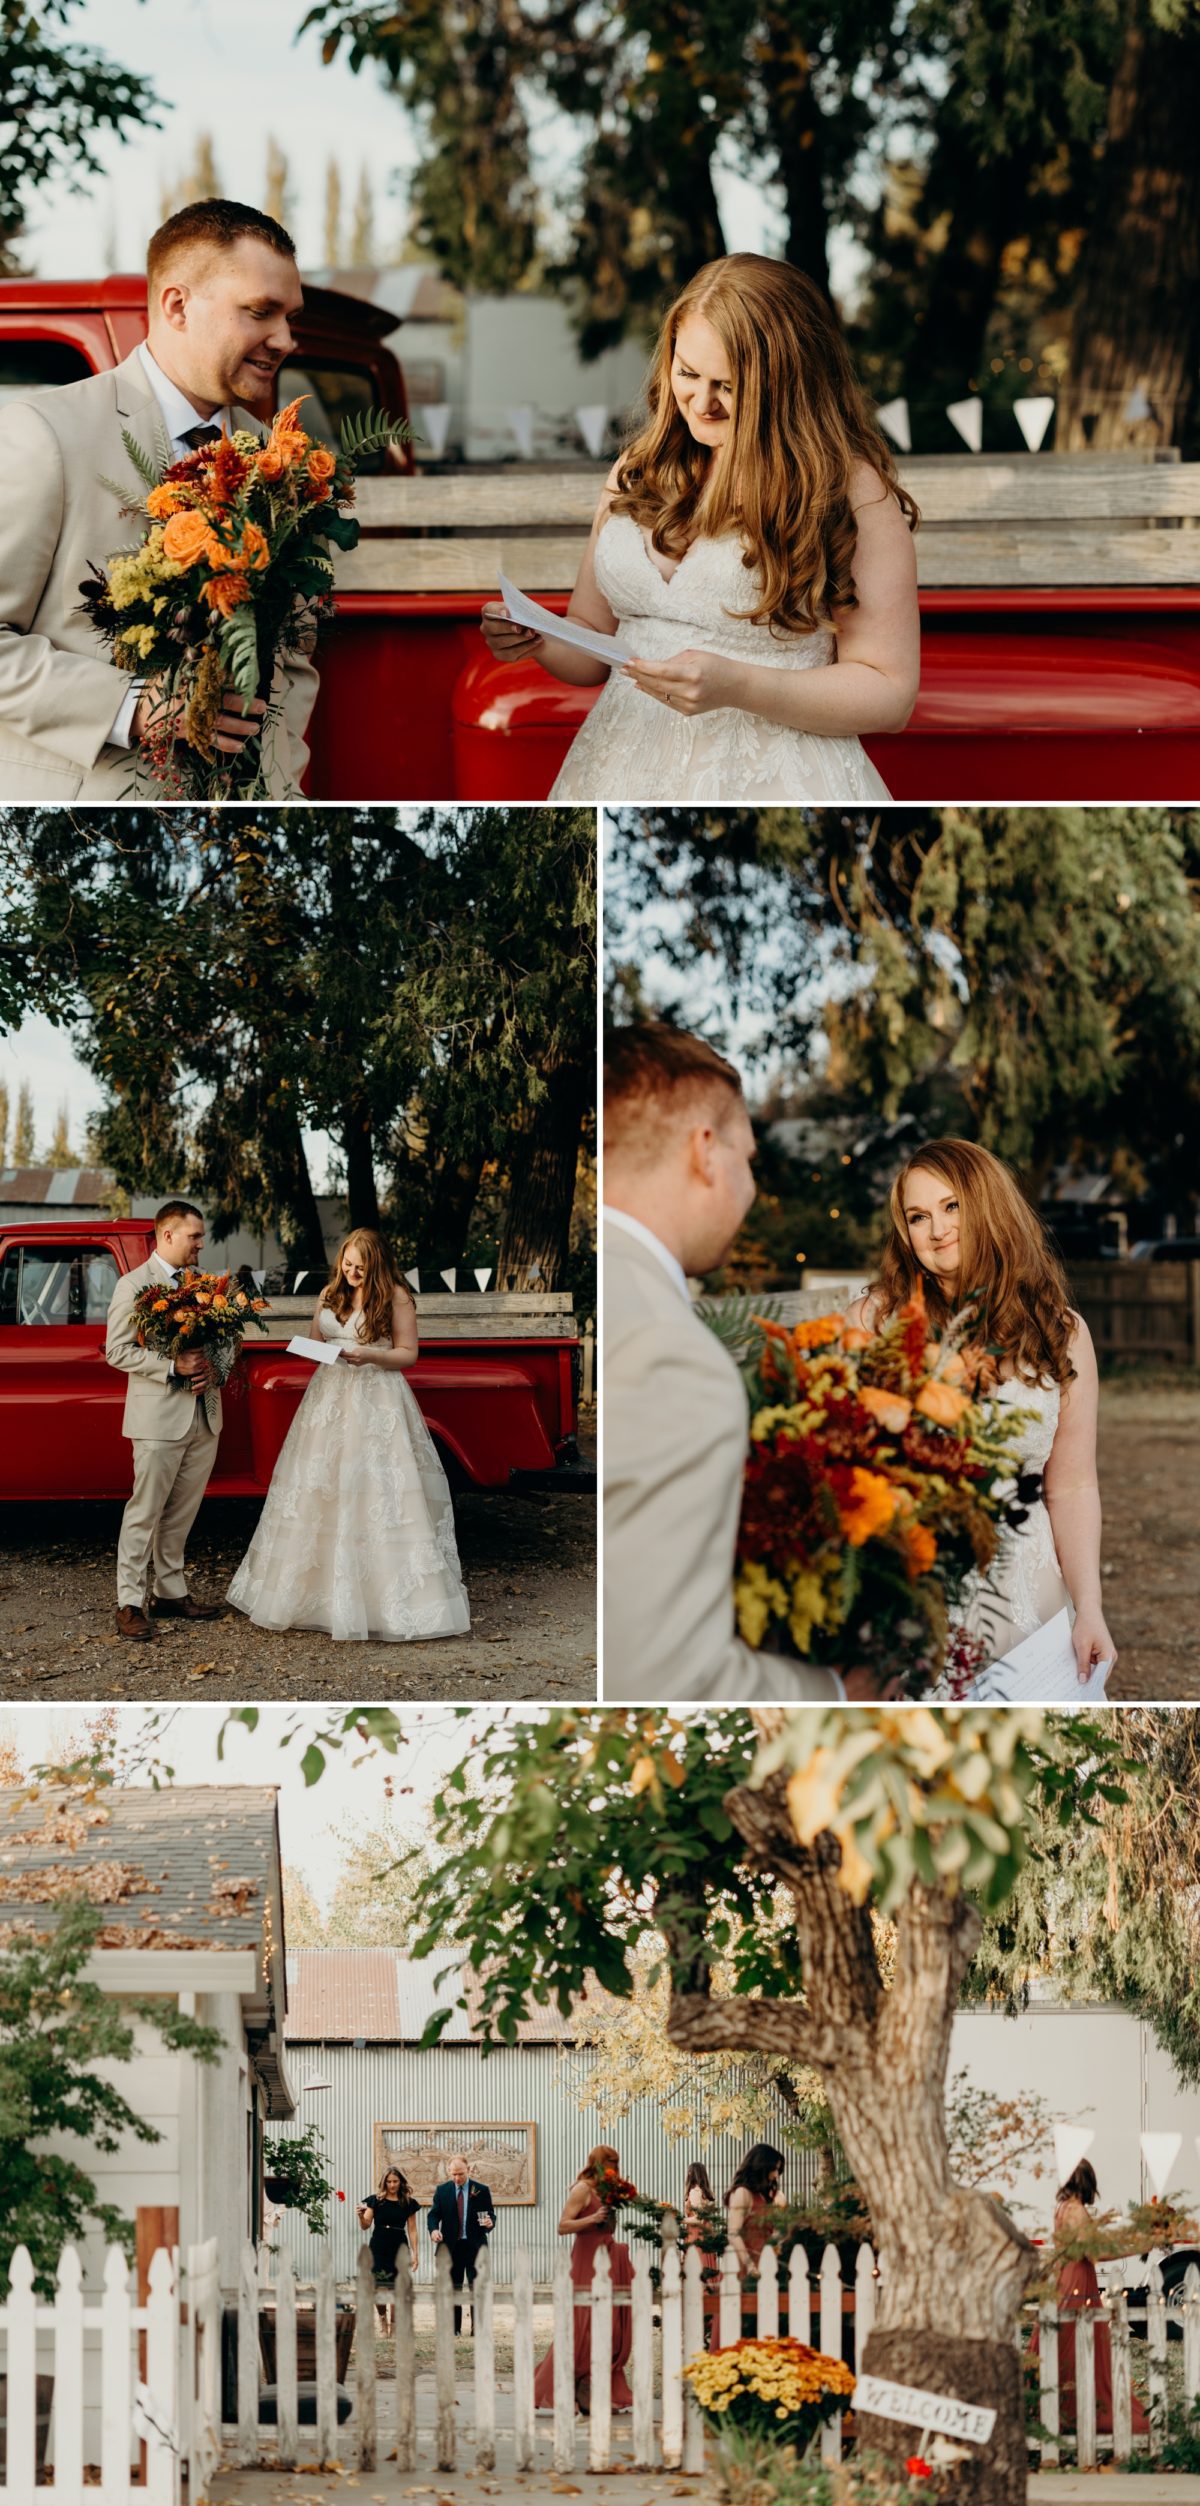 A backyard wedding in Gridley, CA photographed by Briana Morrison